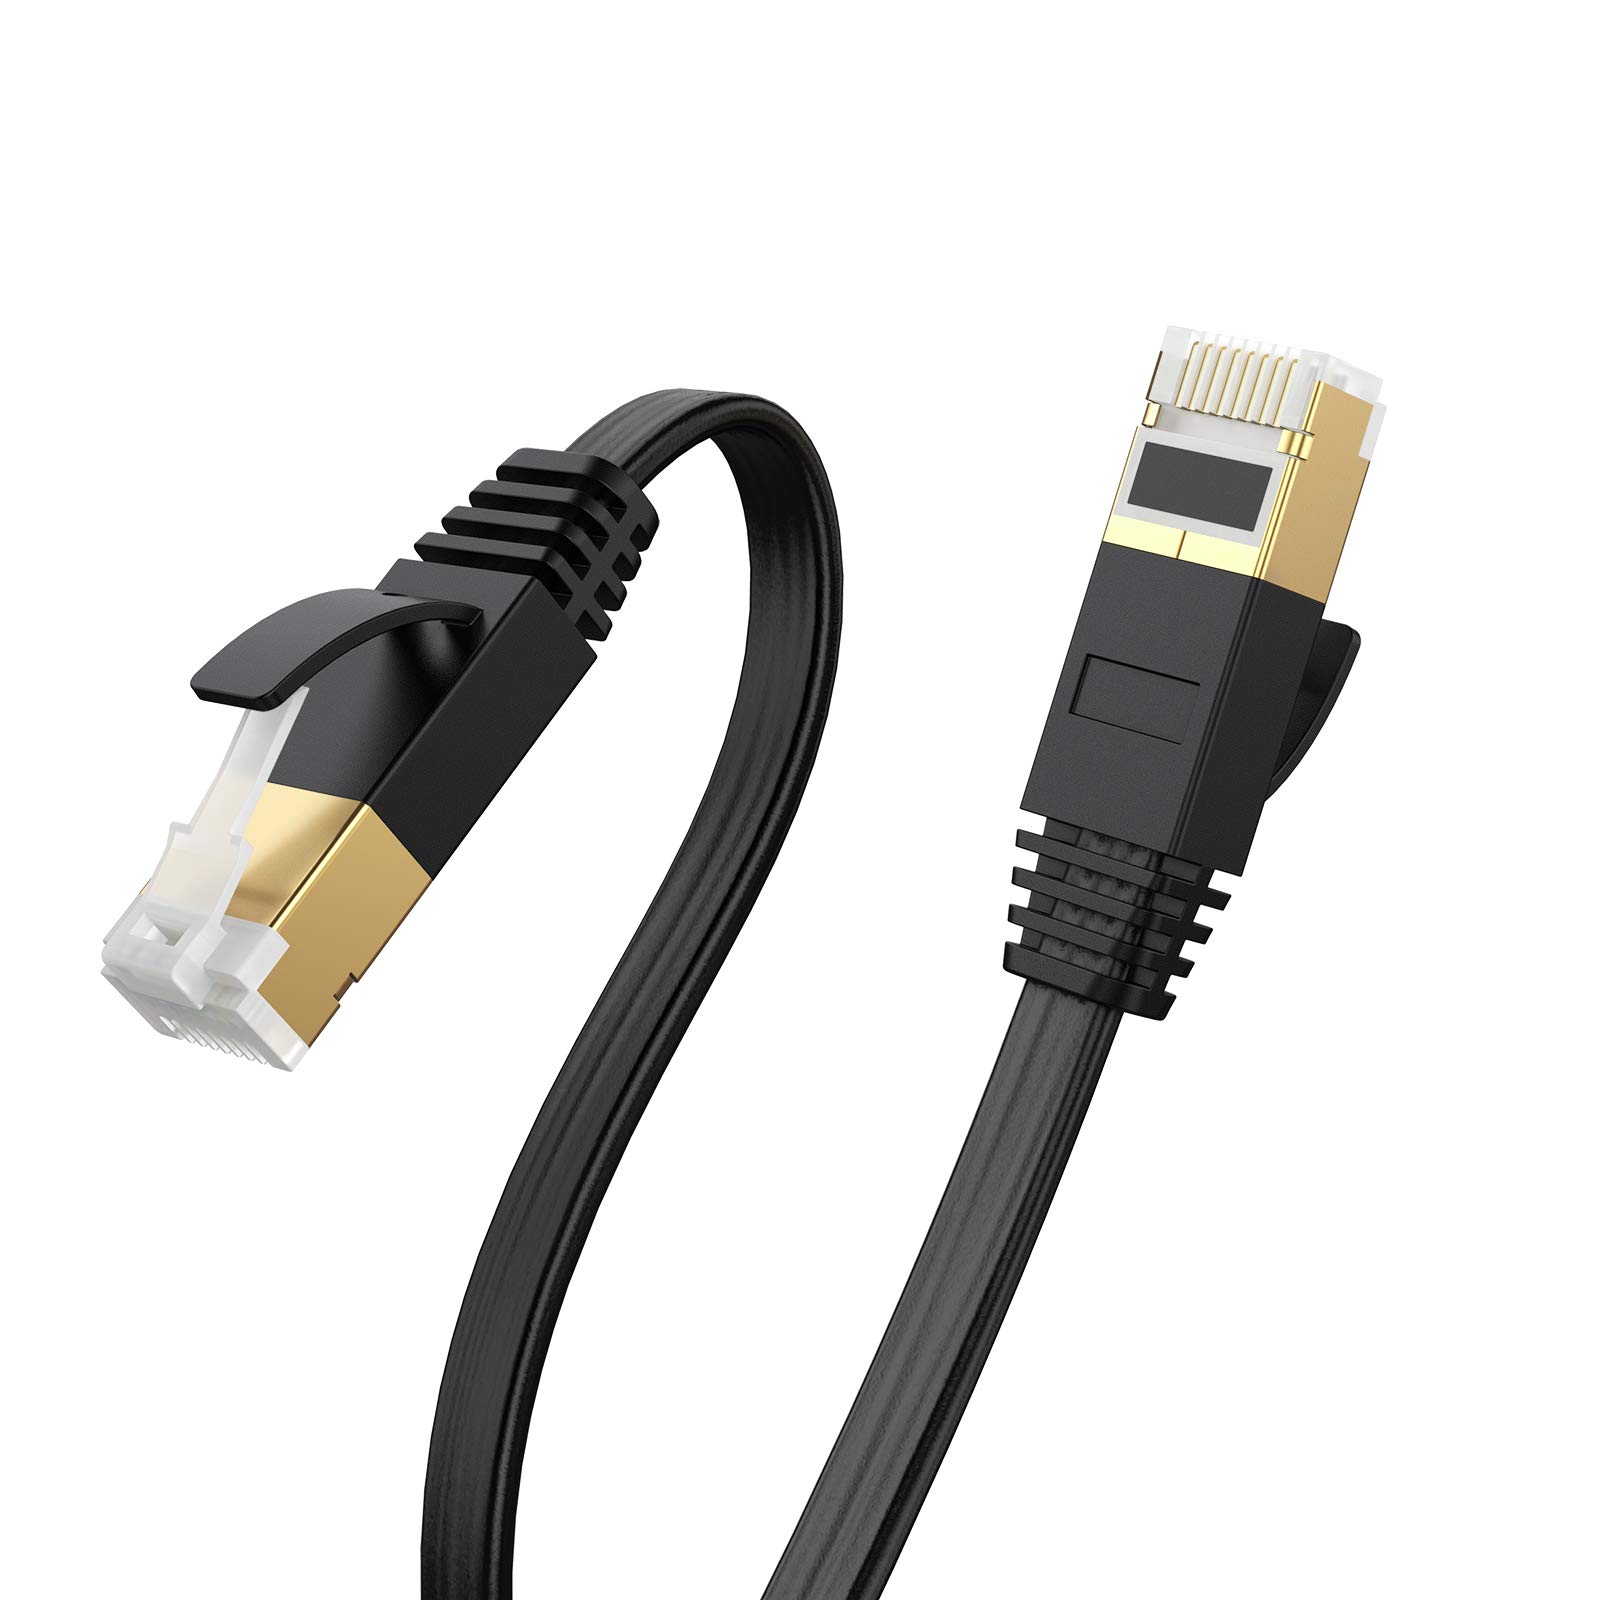 Ethernet Cable RJ45 Cat7 Lan 10Gbps L-shape Cable FTP RJ45 Network Cable  For Cat 6A Compatible Patch Cord For Modem Router Cable